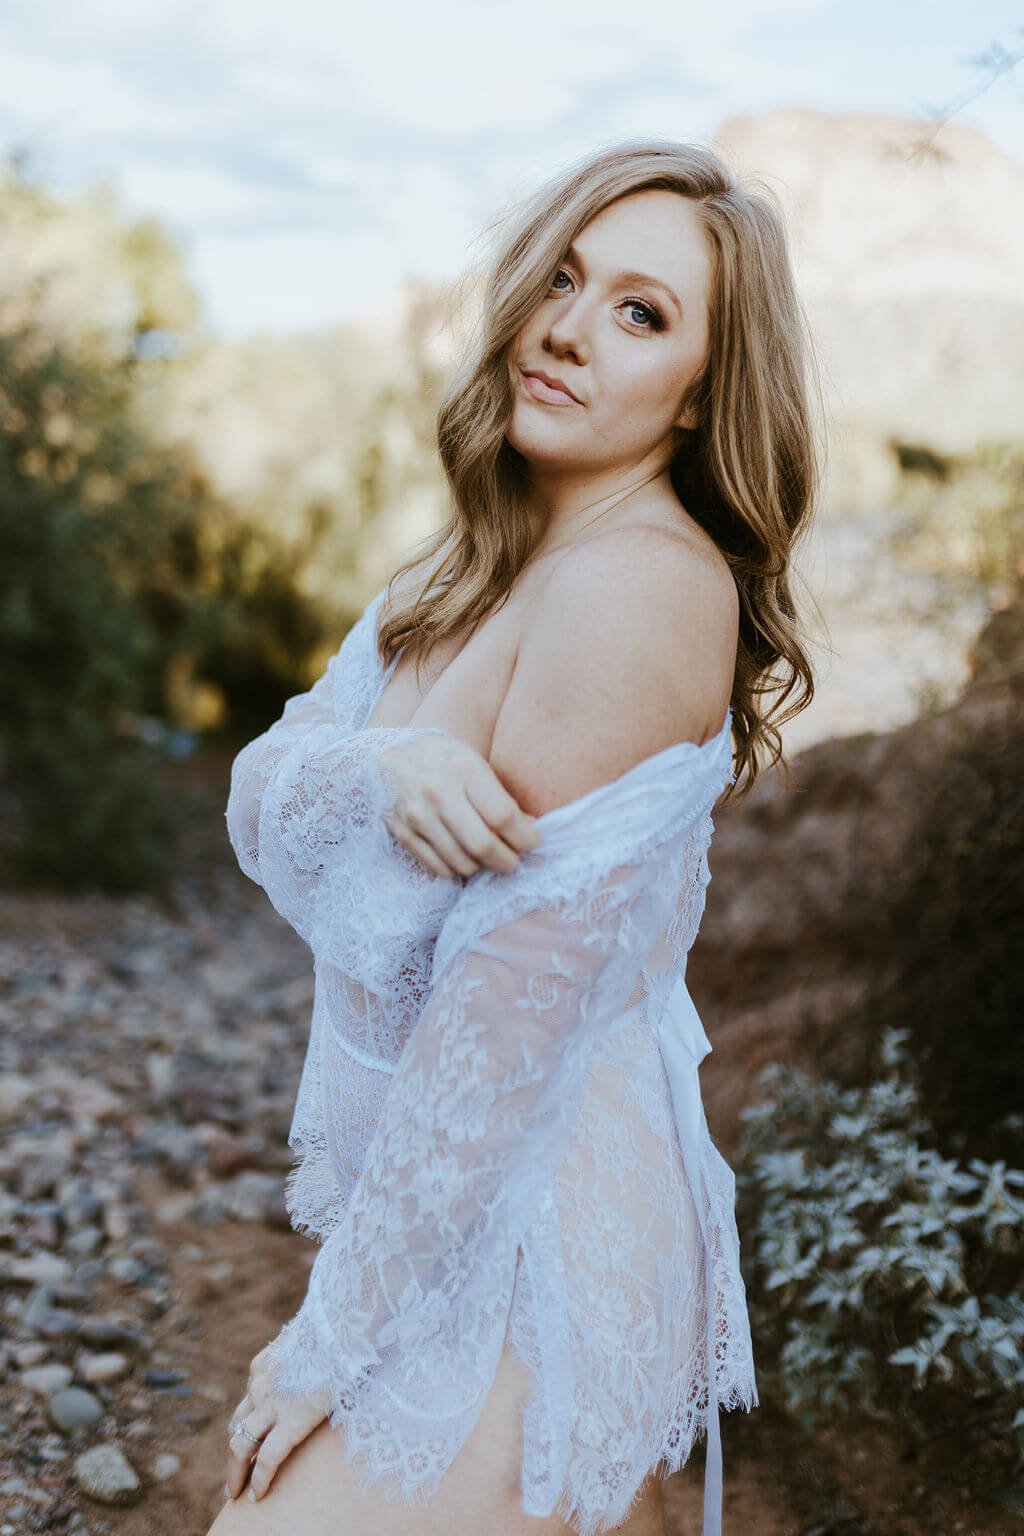  Woman in lingerie in nature boudoir photoshoot  